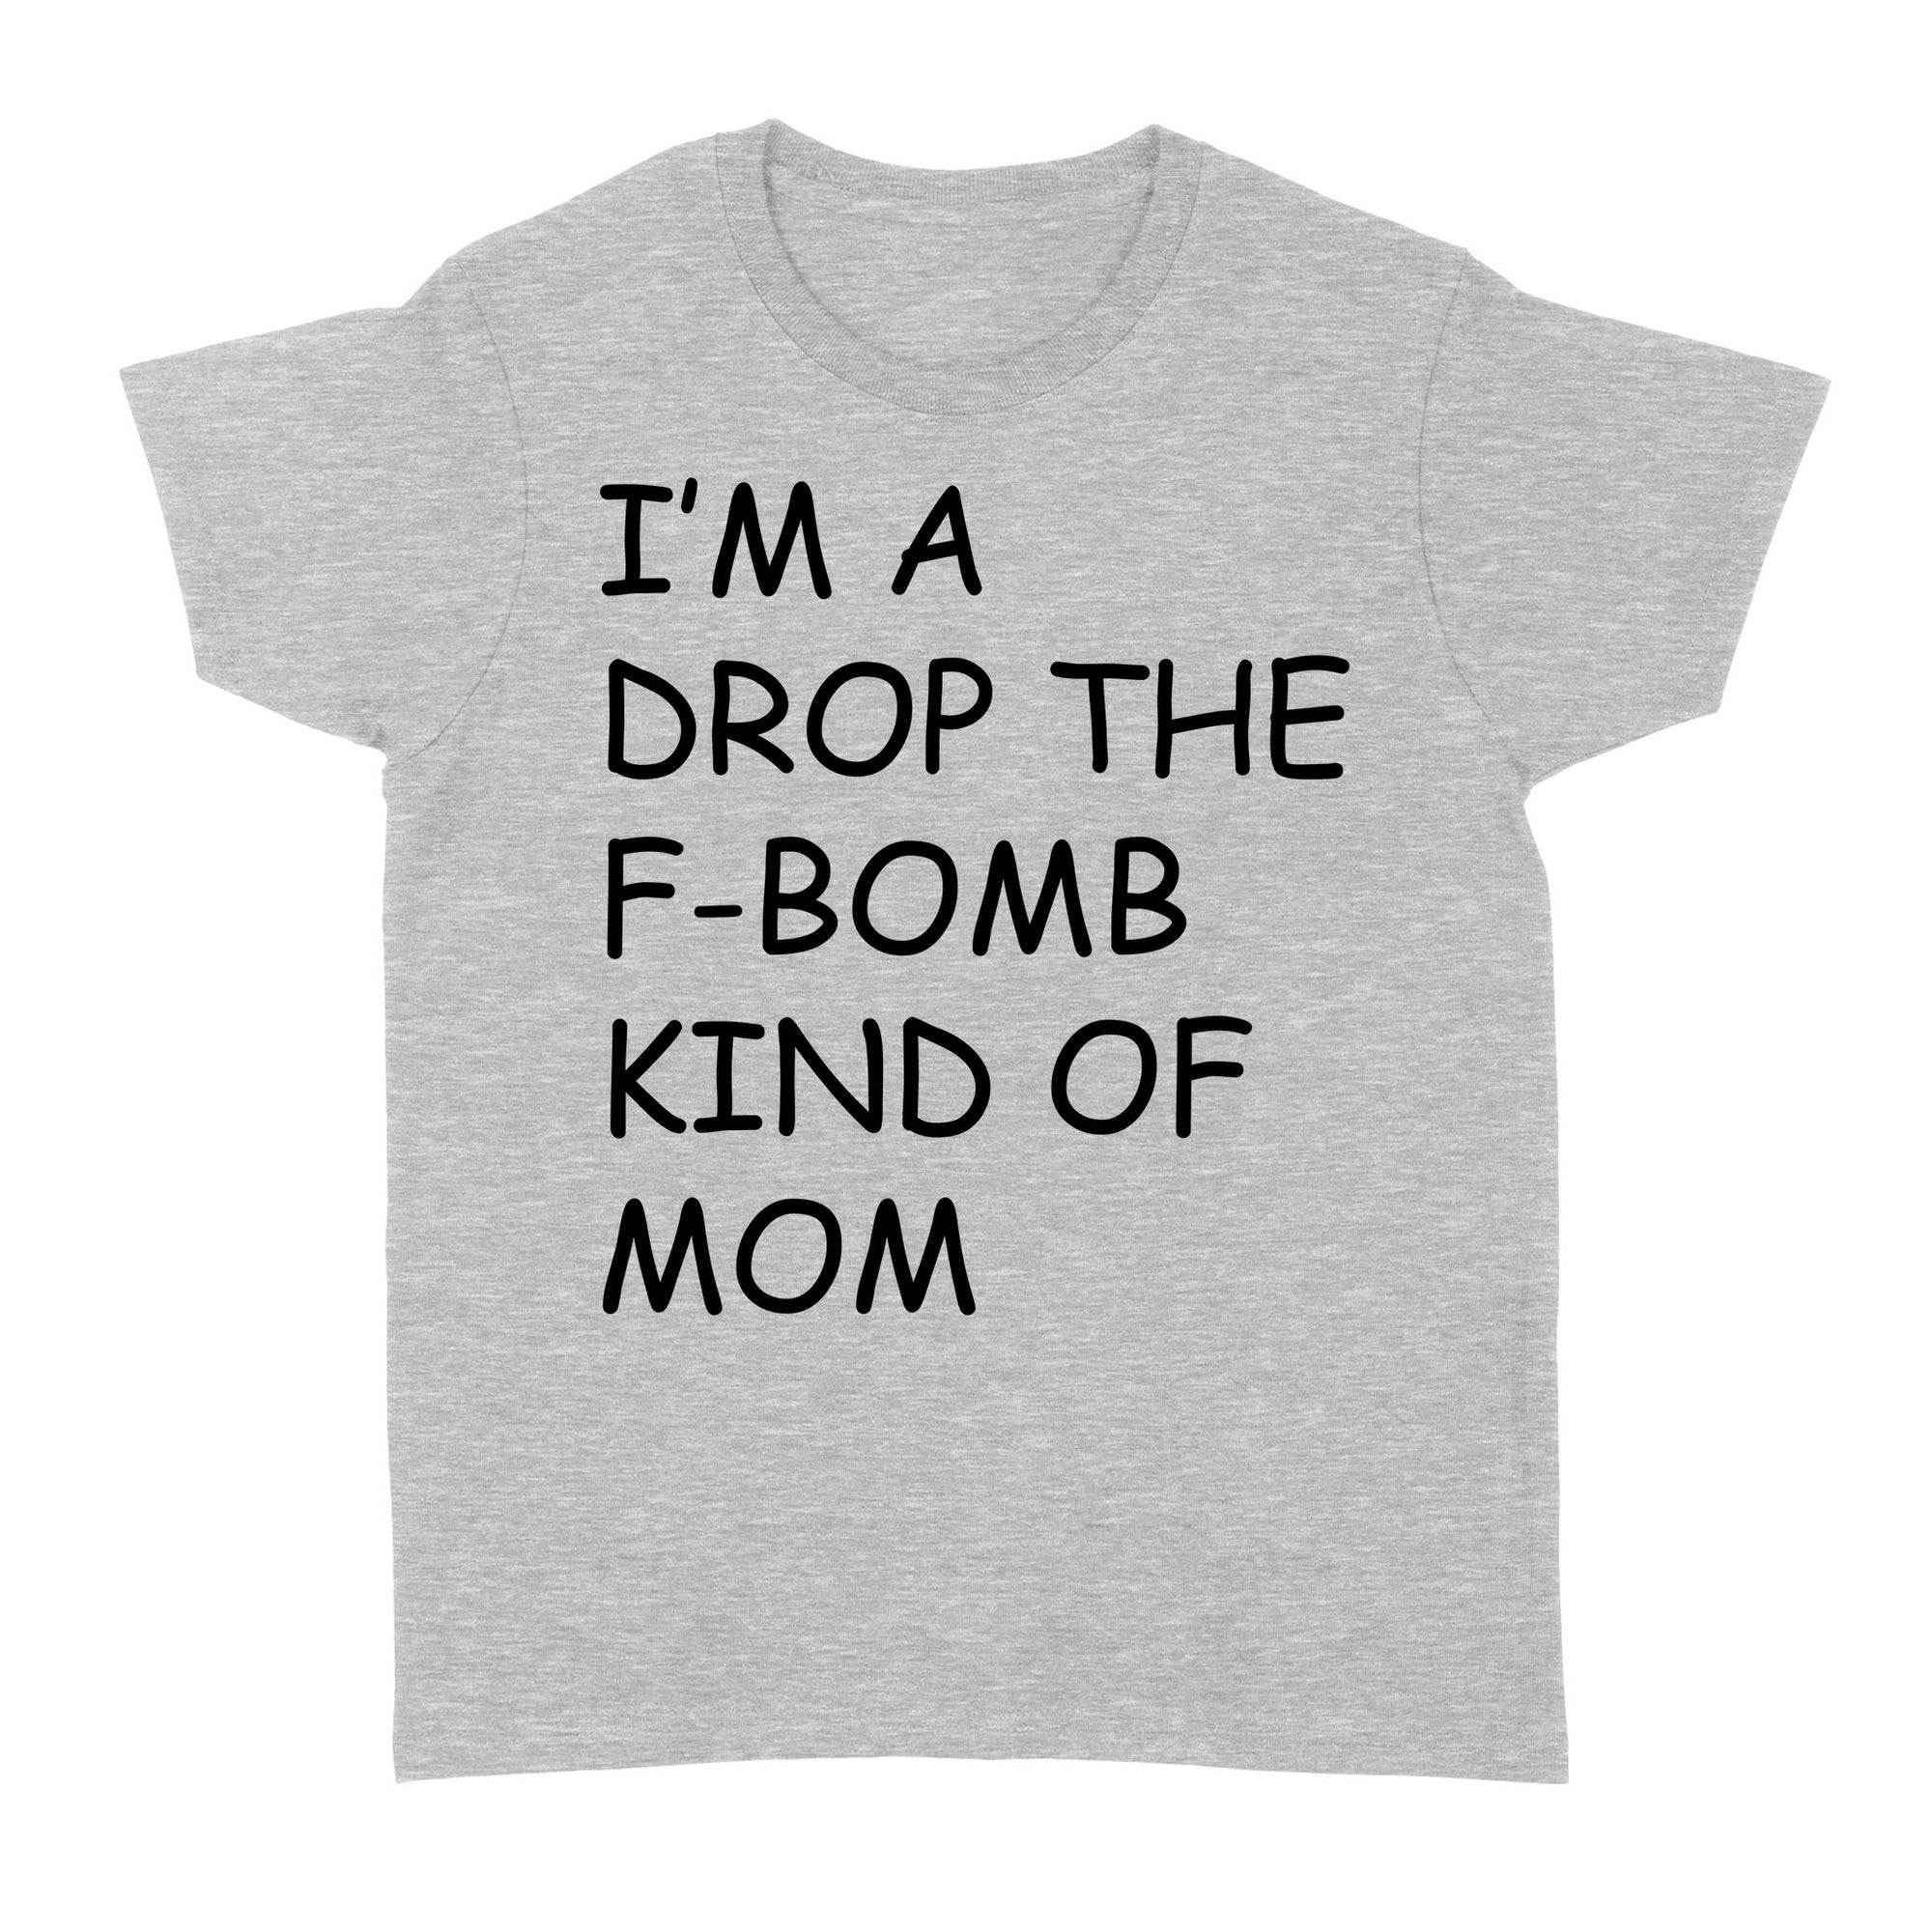 I'm A Drop The F-Bomb Kind Of Mom W Funny Gift Ideas for Mom Mother Mothers Day Wife - Standard Women's T-shirt